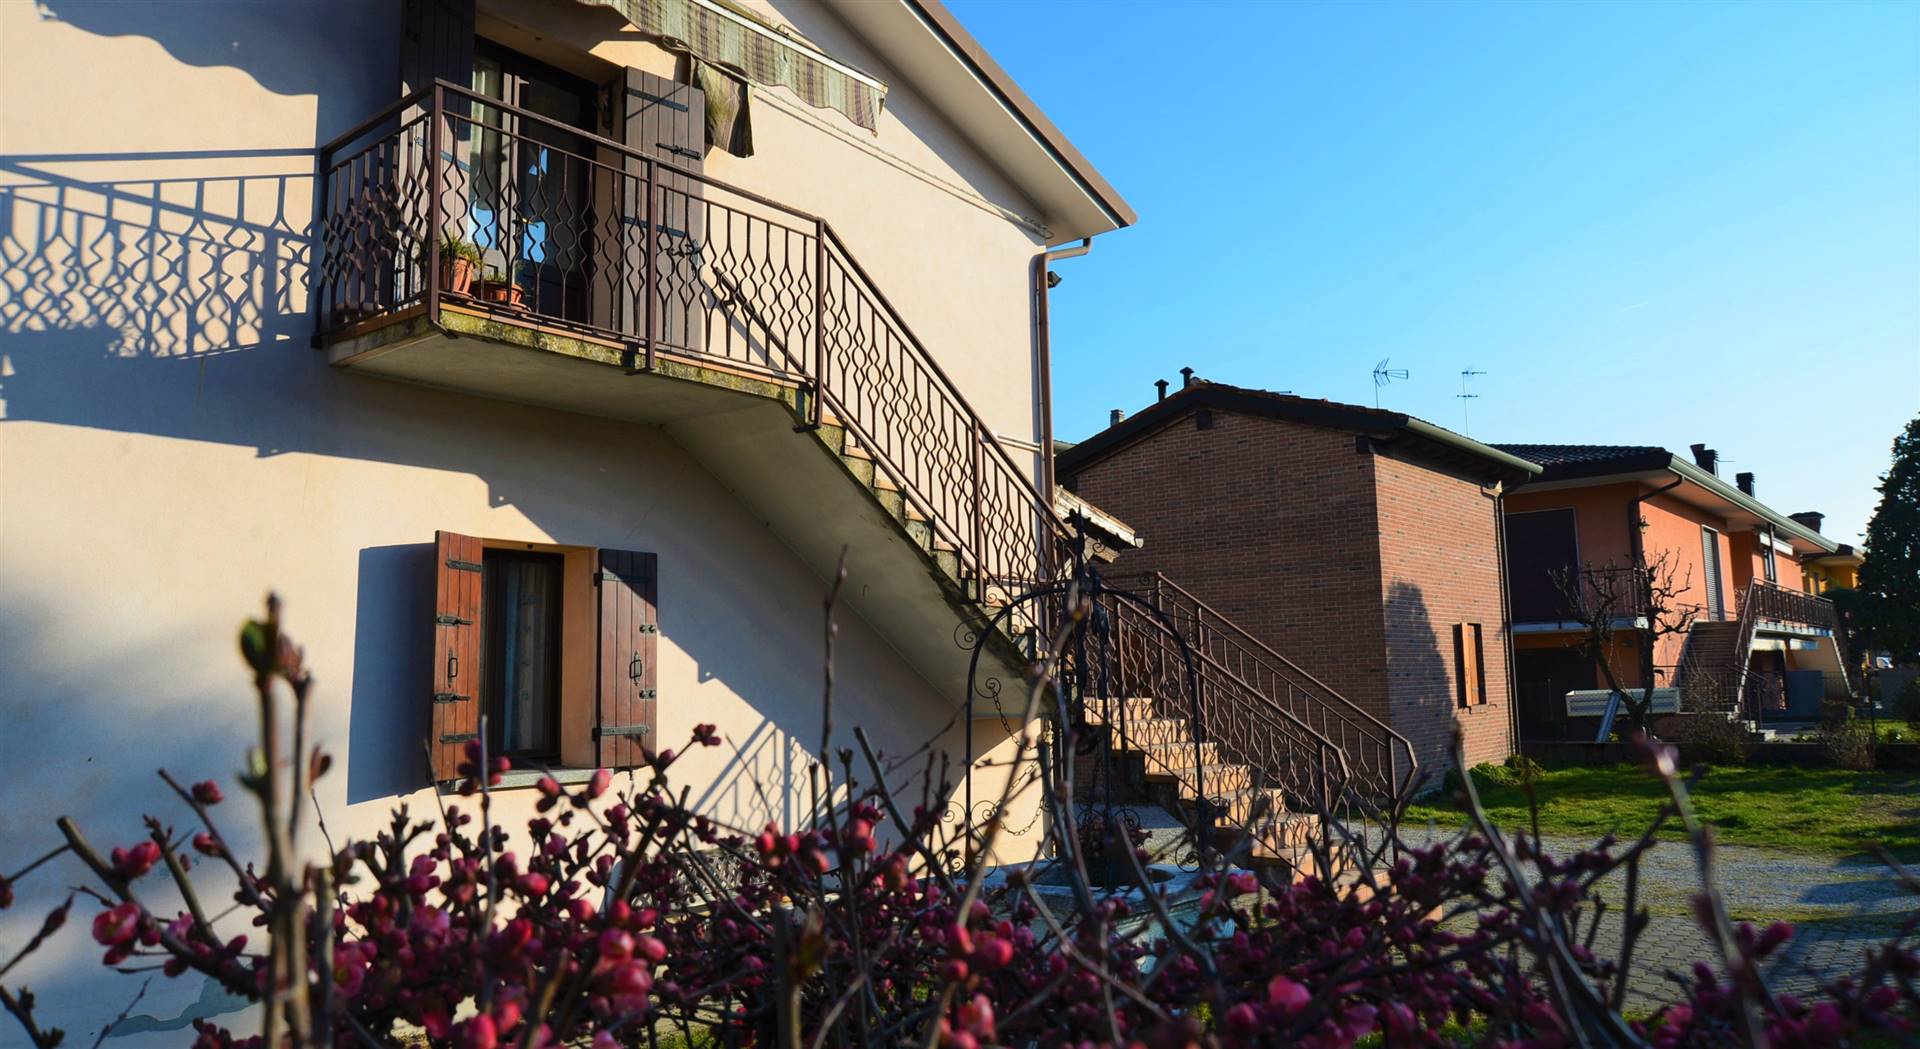 ROSSIGNAGO, SPINEA, Duplex villa for sale of 225 Sq. mt., Habitable, Heating Individual heating system, placed at Ground on 1, composed by: 10 Rooms, Separate kitchen, , 6 Bedrooms, 4 Bathrooms, 